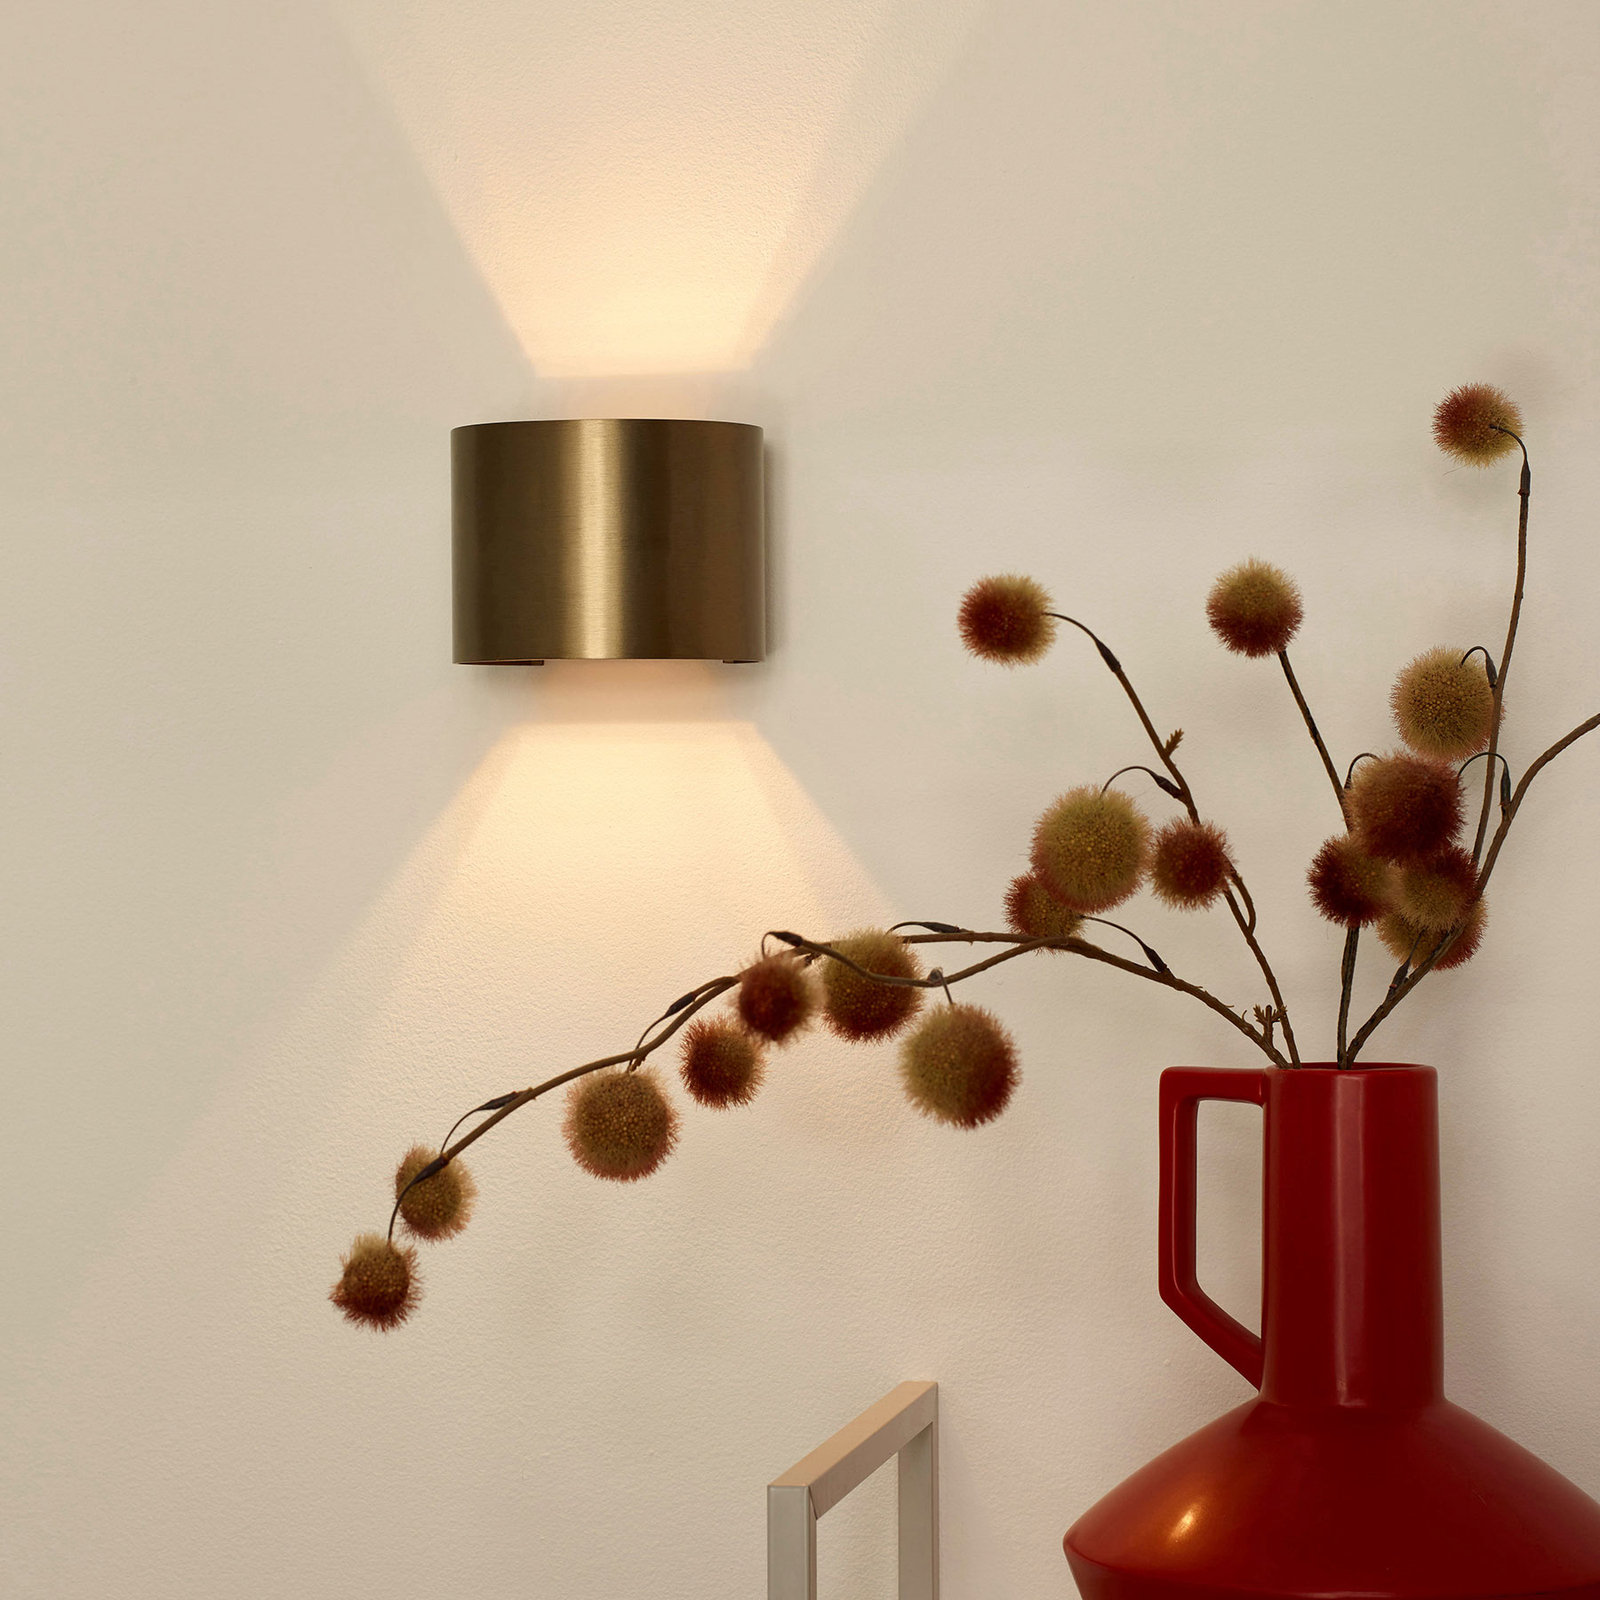 LED wall light Xio, round, antique brass